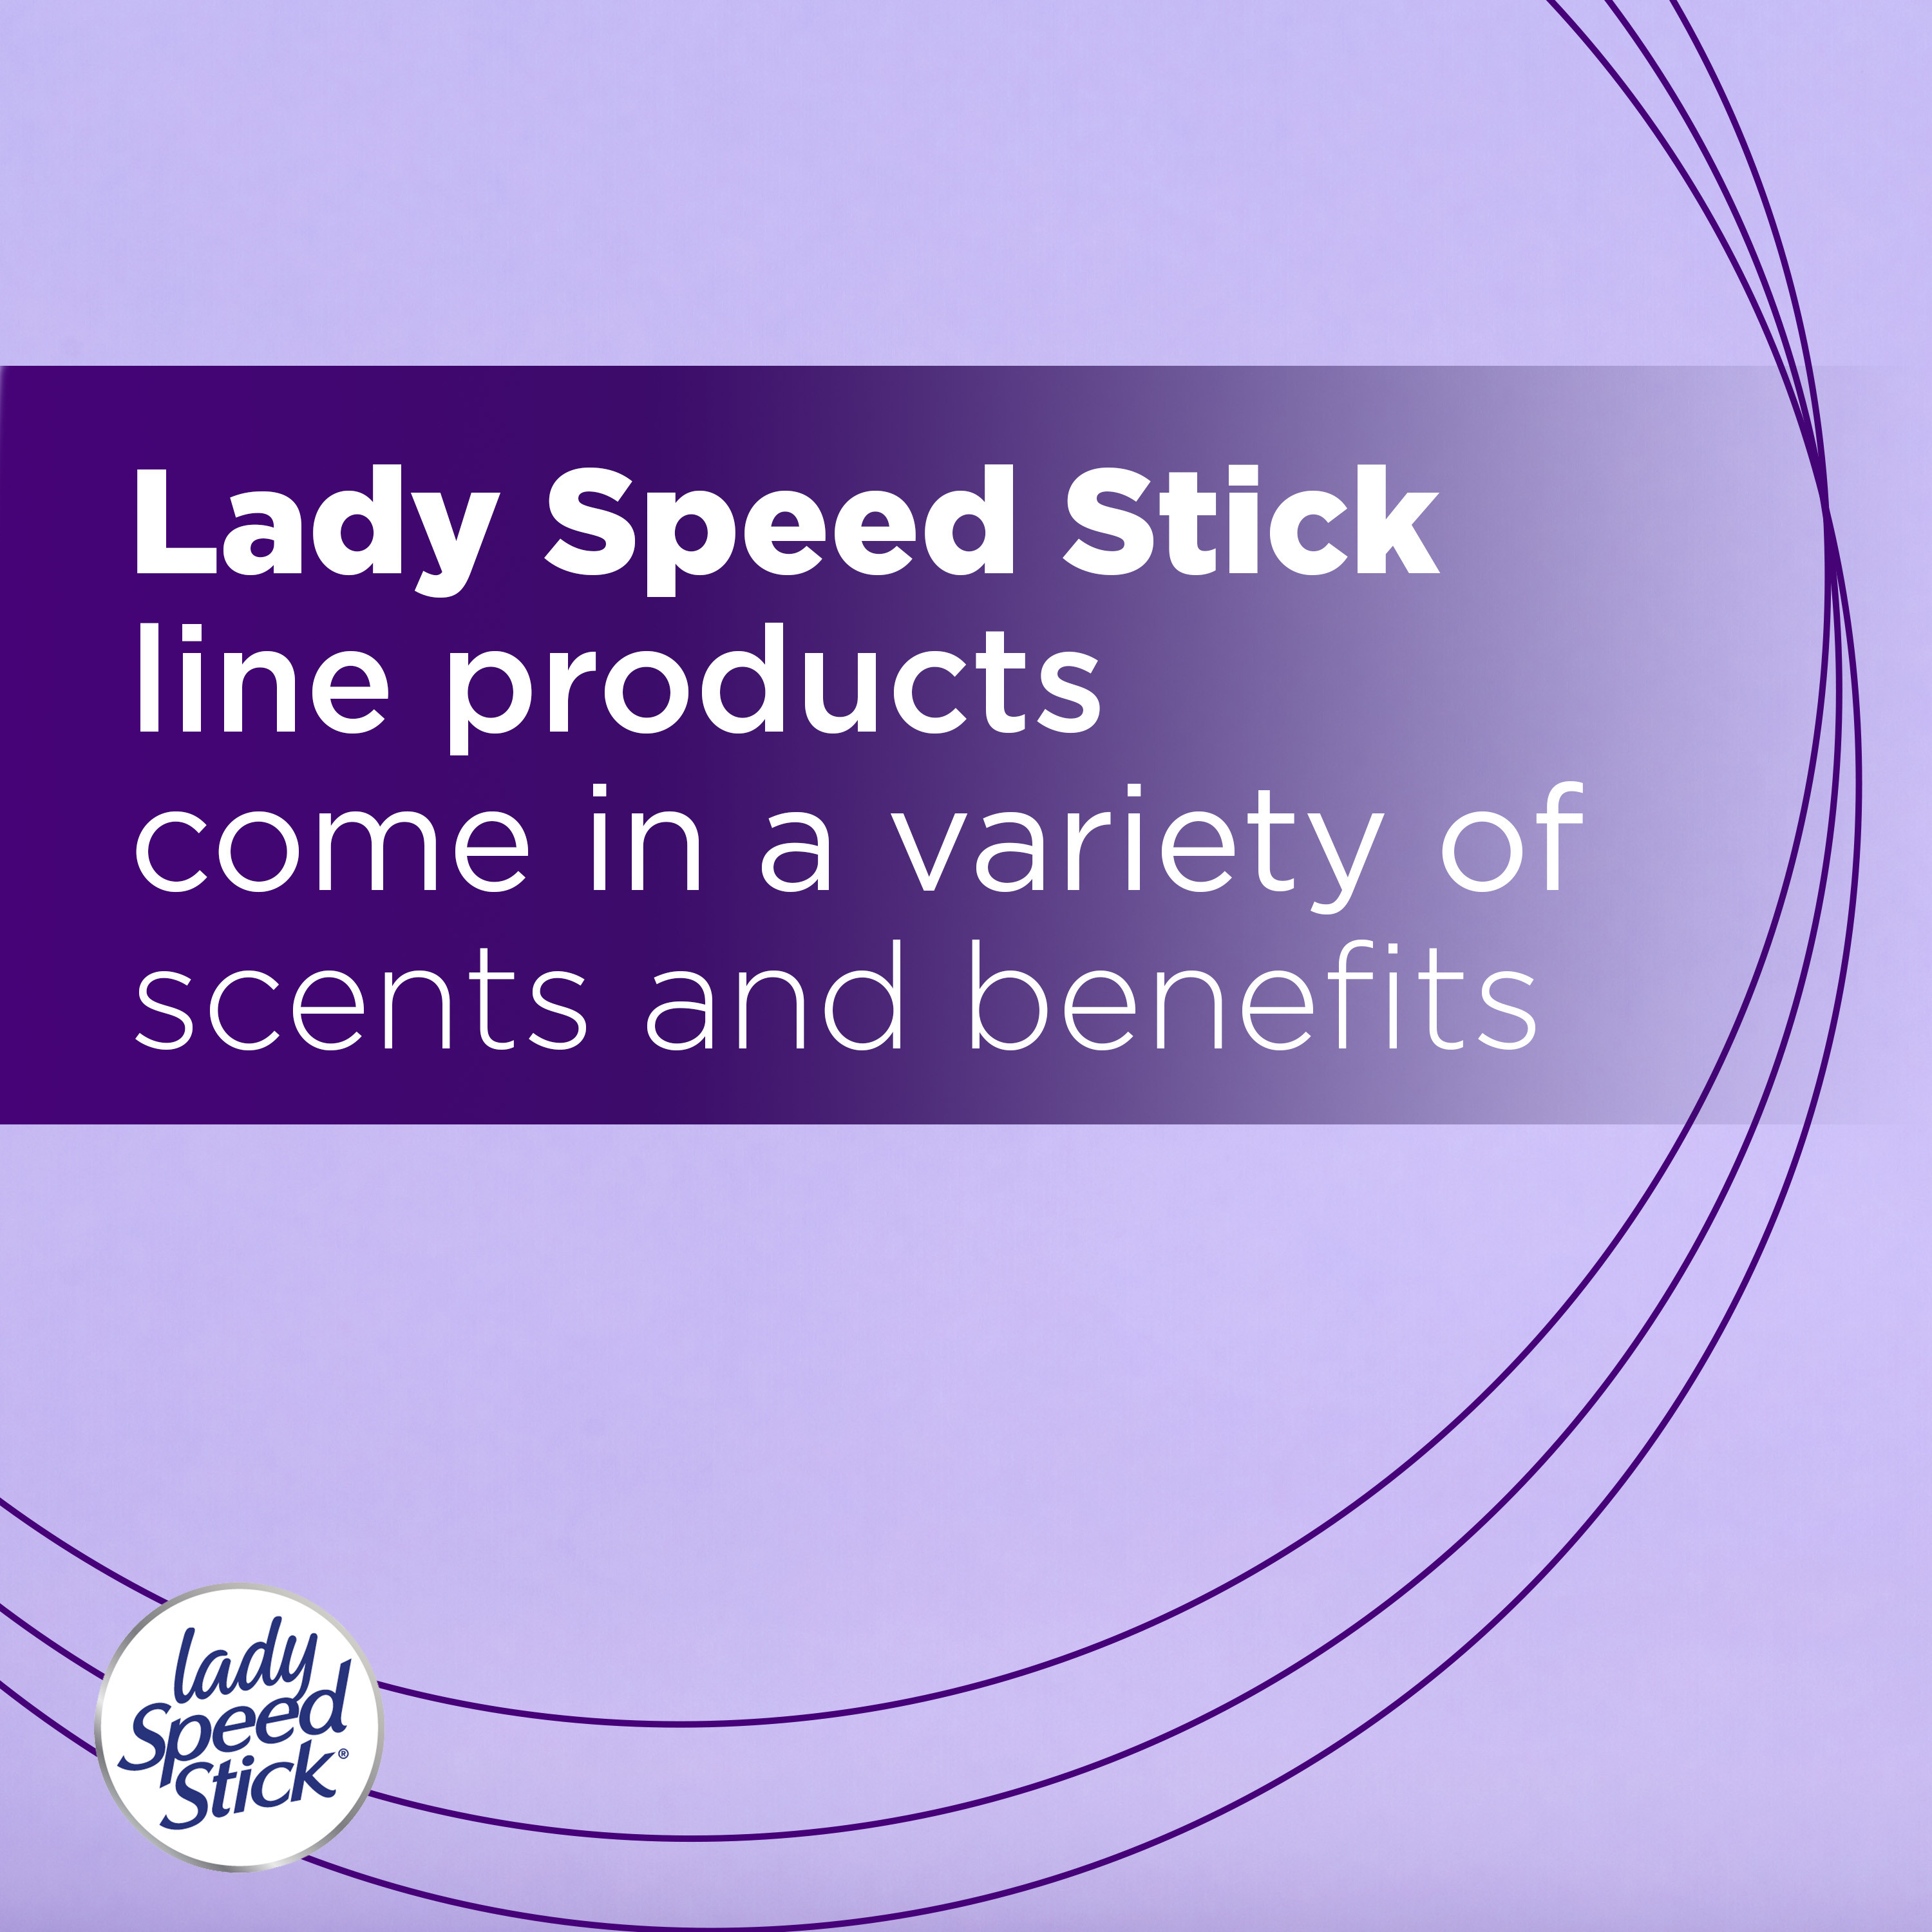 Lady Speed Stick Invisible Dry Antiperspirant Female Deodorant, Shower Fresh, 2 Pack, 2.3 oz - image 12 of 15